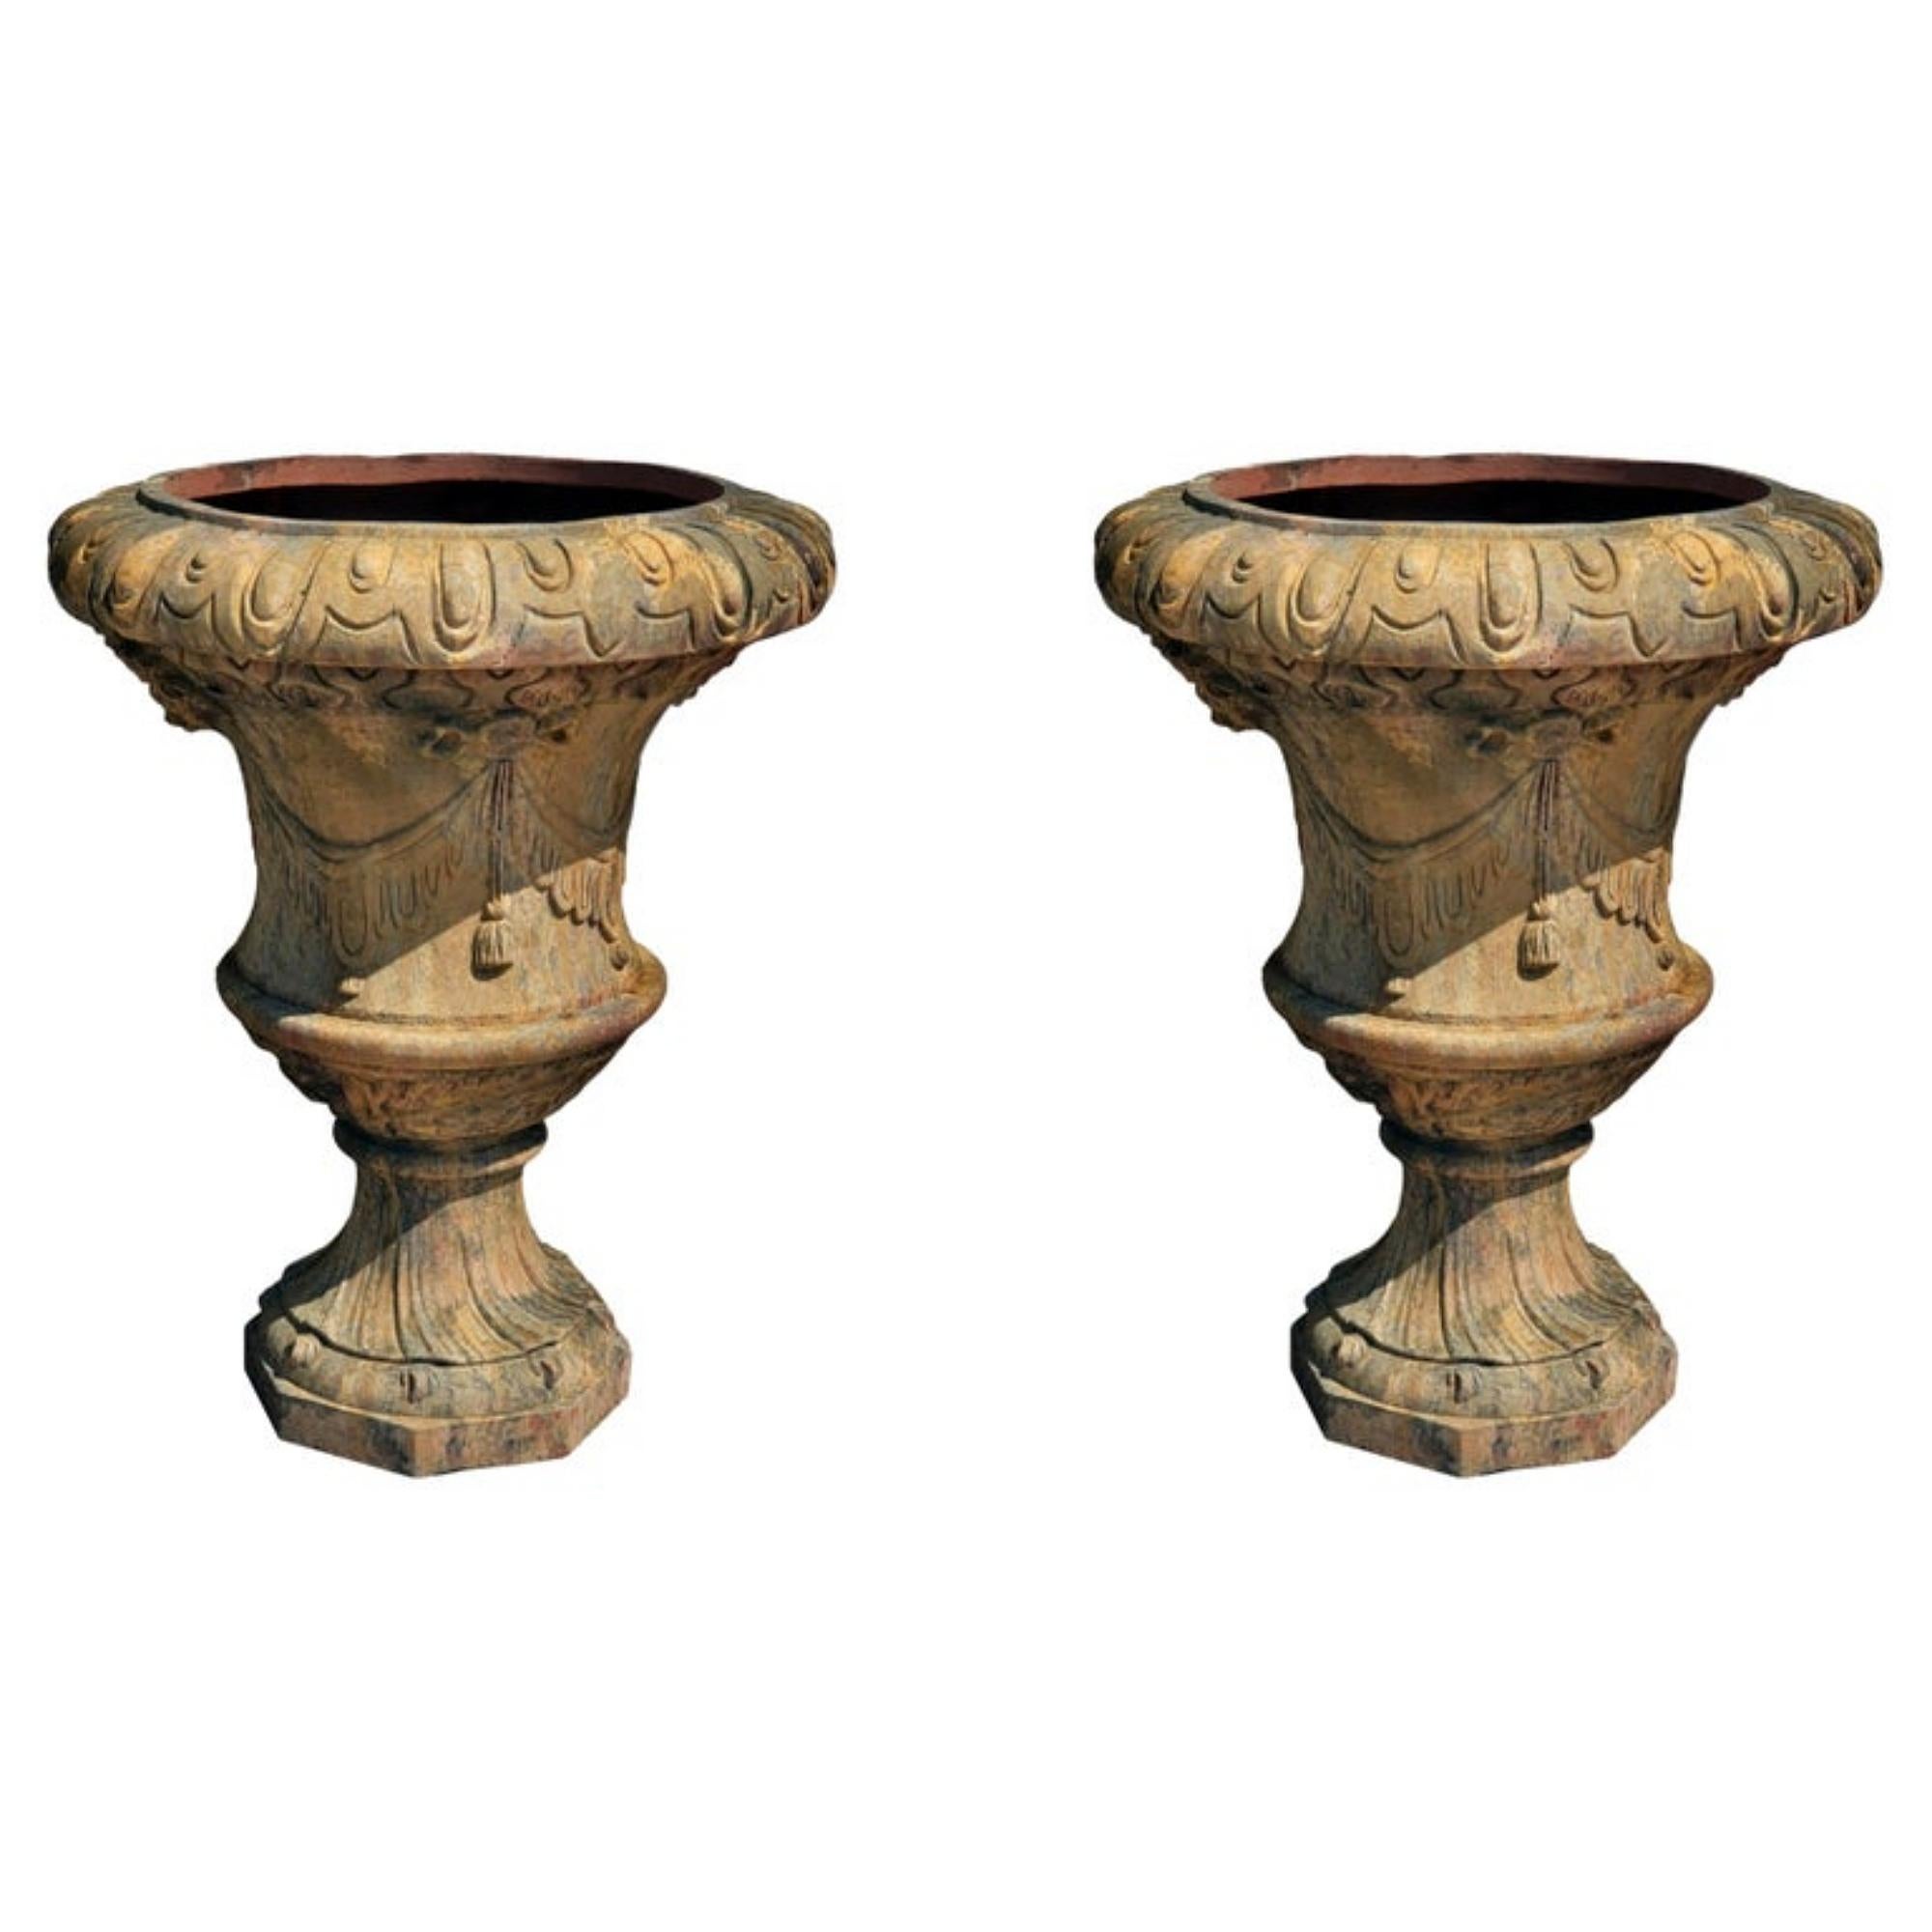 Hand-Crafted Pair of Large Florentine Ornamental Vases in Terracotta Early 20th Century For Sale